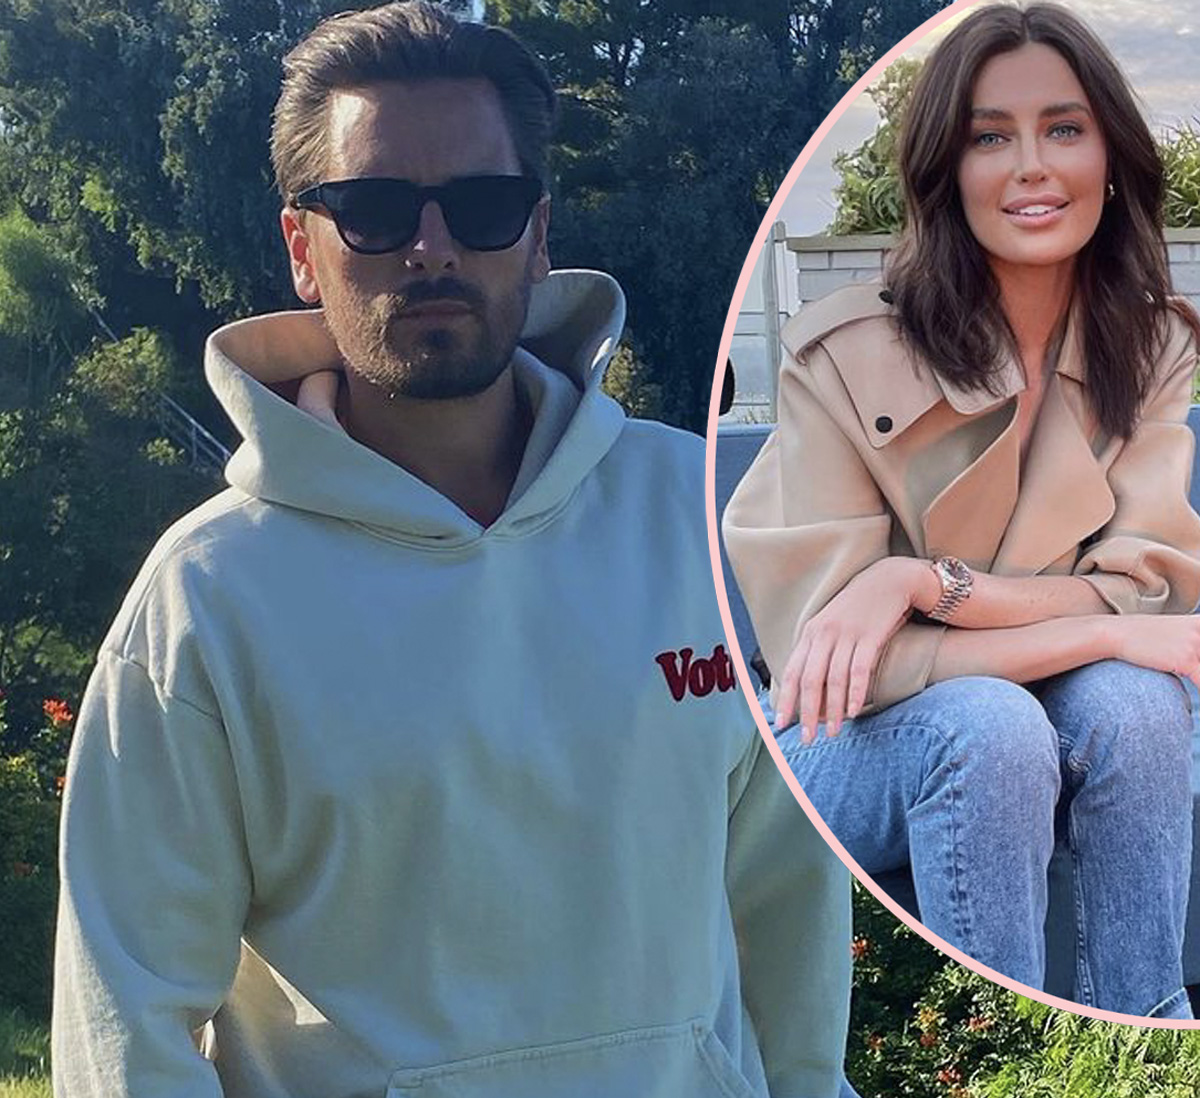 Whoa! Scott Disick Supposedly 'Wants To Settle Down' With His New Model Girlfriend?!